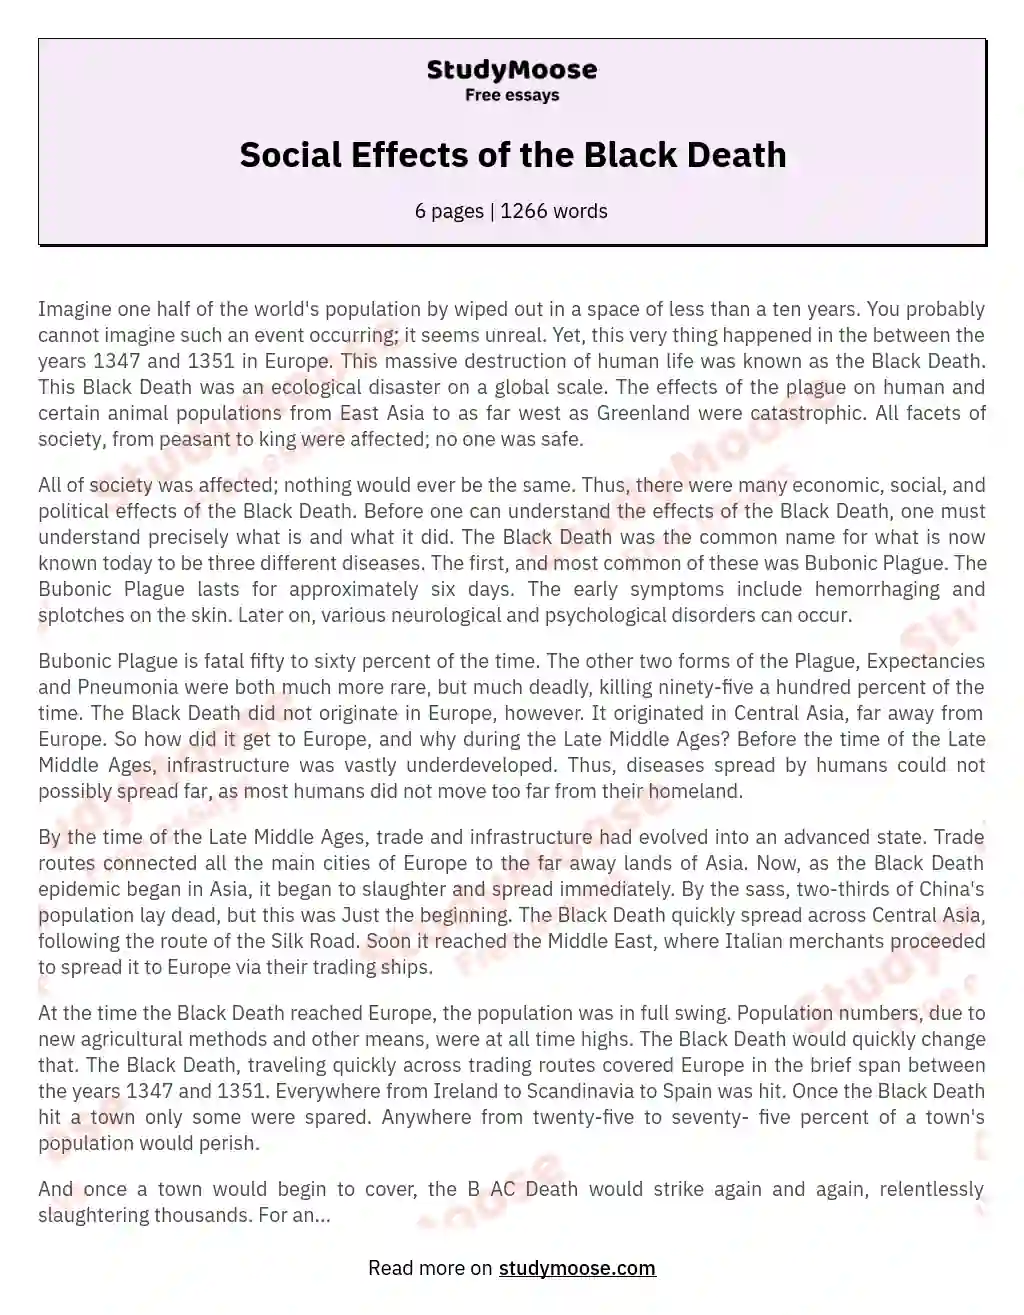 Social Effects of the Black Death essay